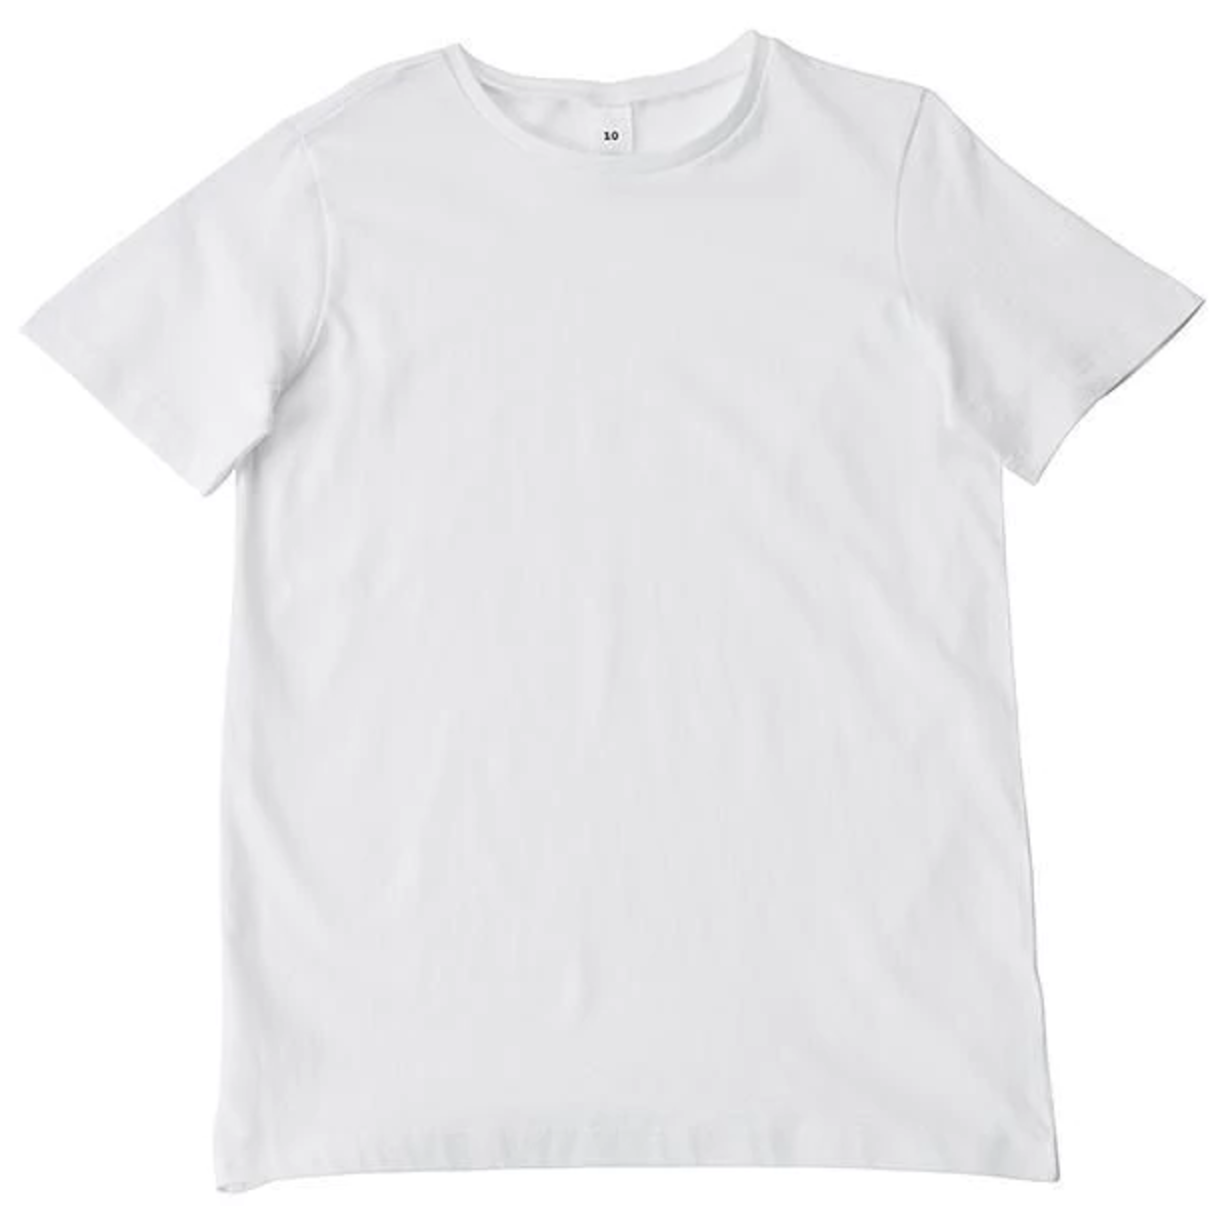 Blank kids t-shirts for dyeing